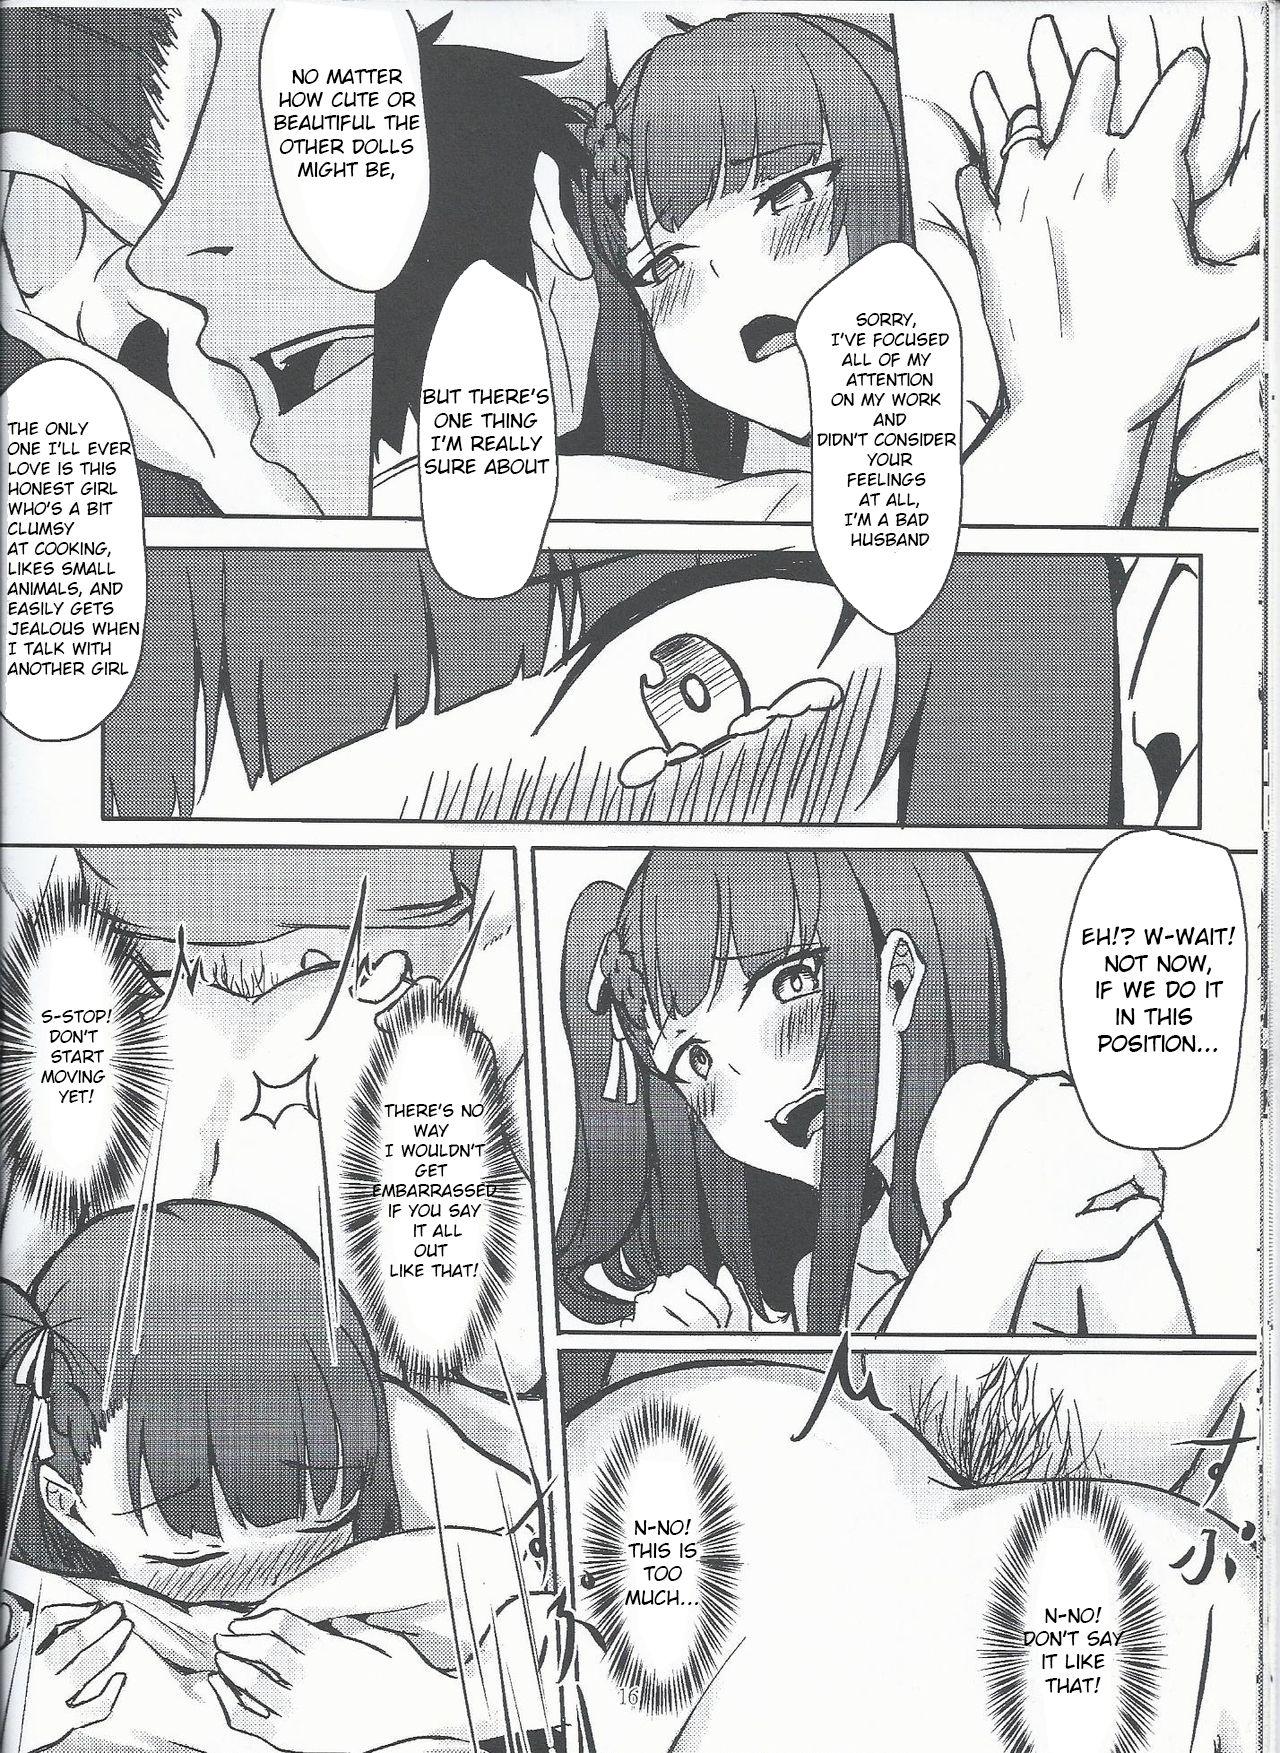 I don't know what to title this book, but anyway it's about WA2000 14